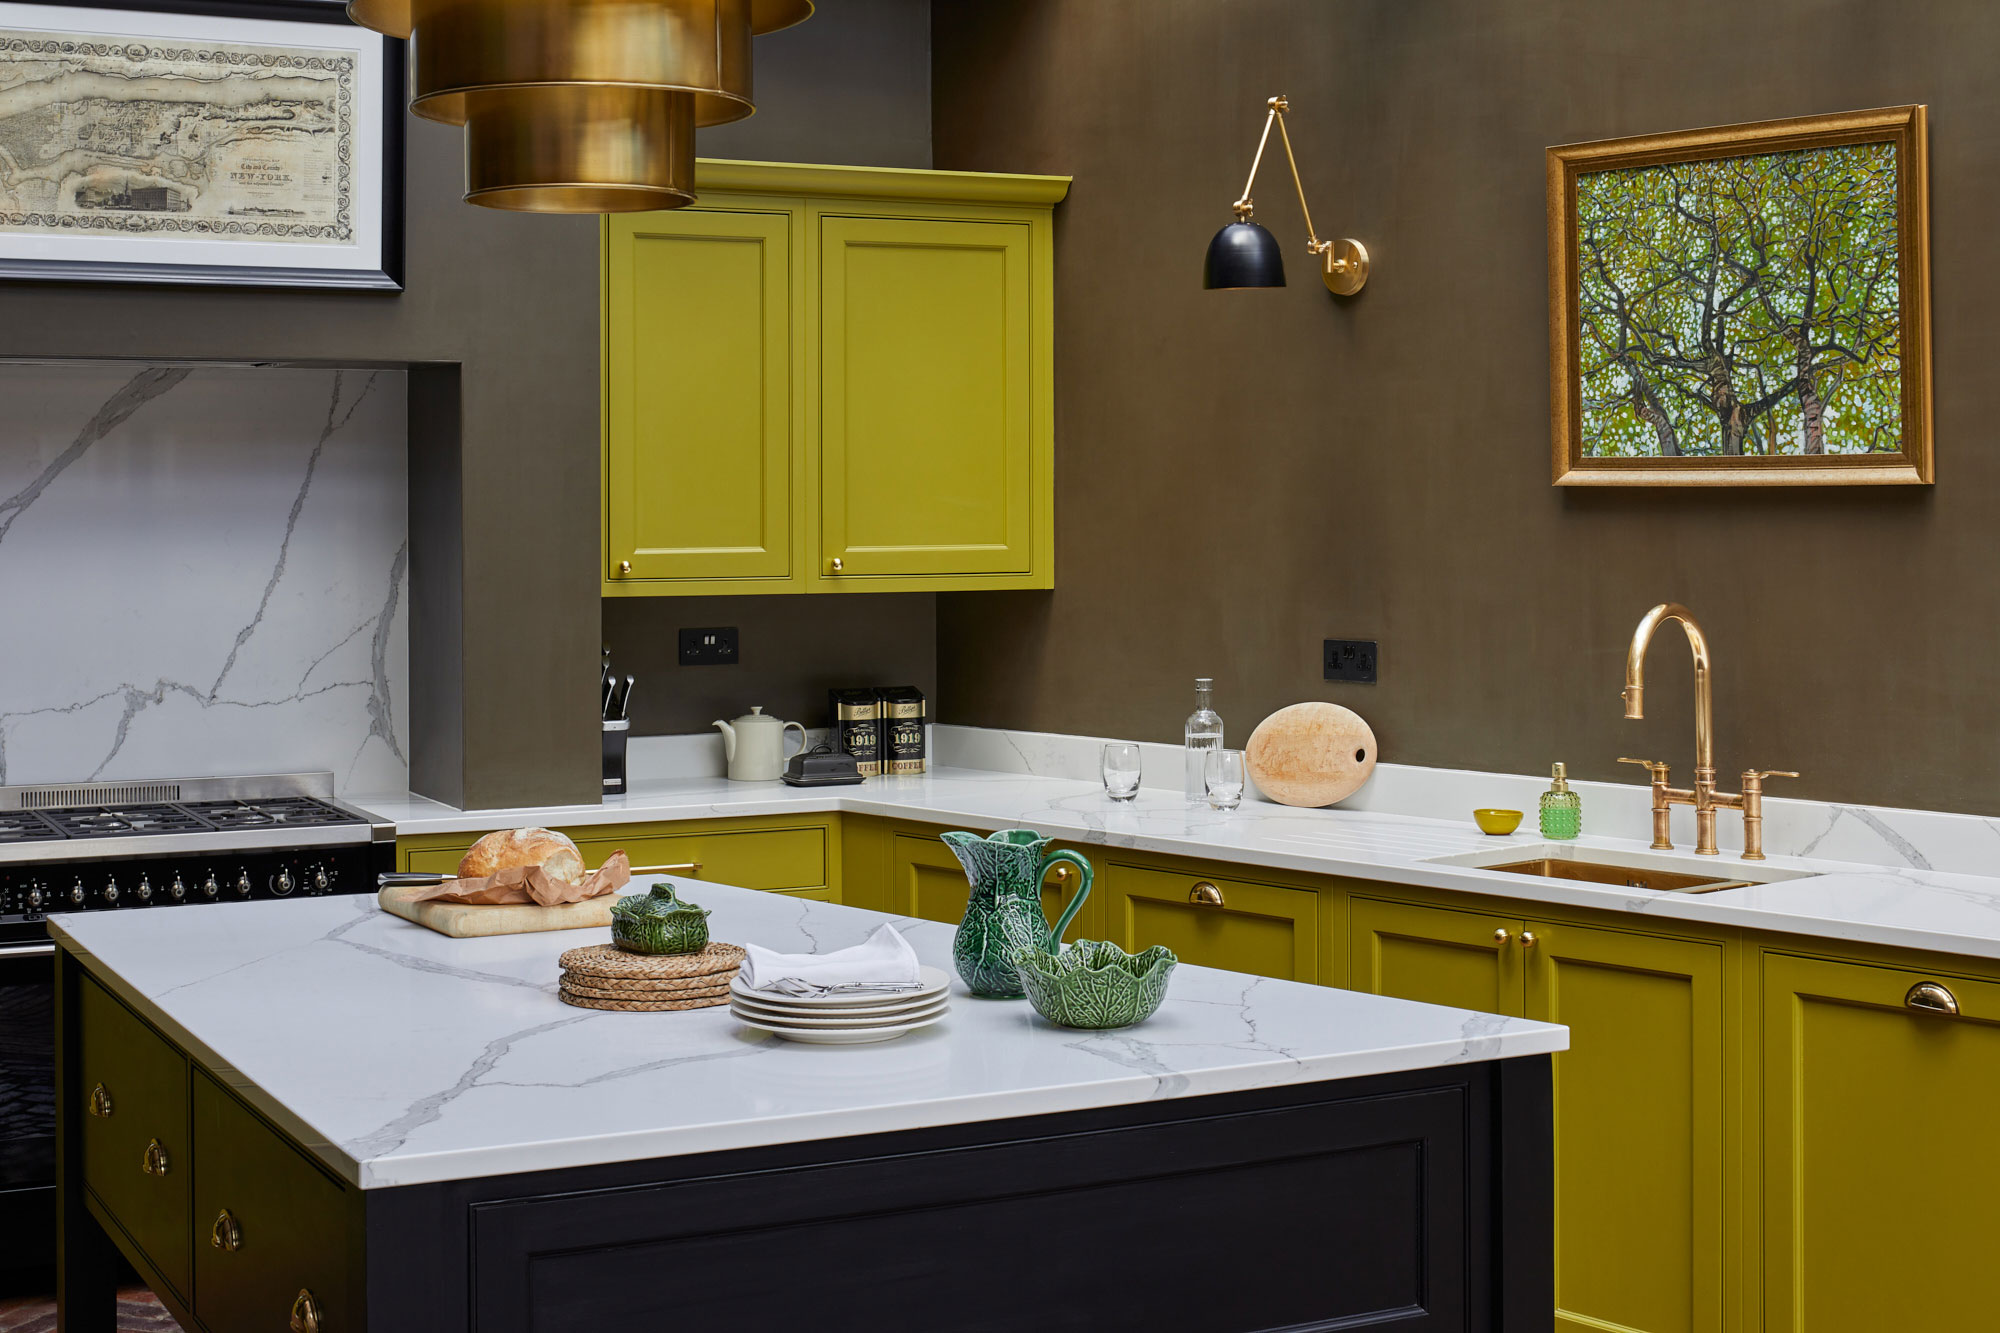 lime green kitchen cabinets using Little Greene paint